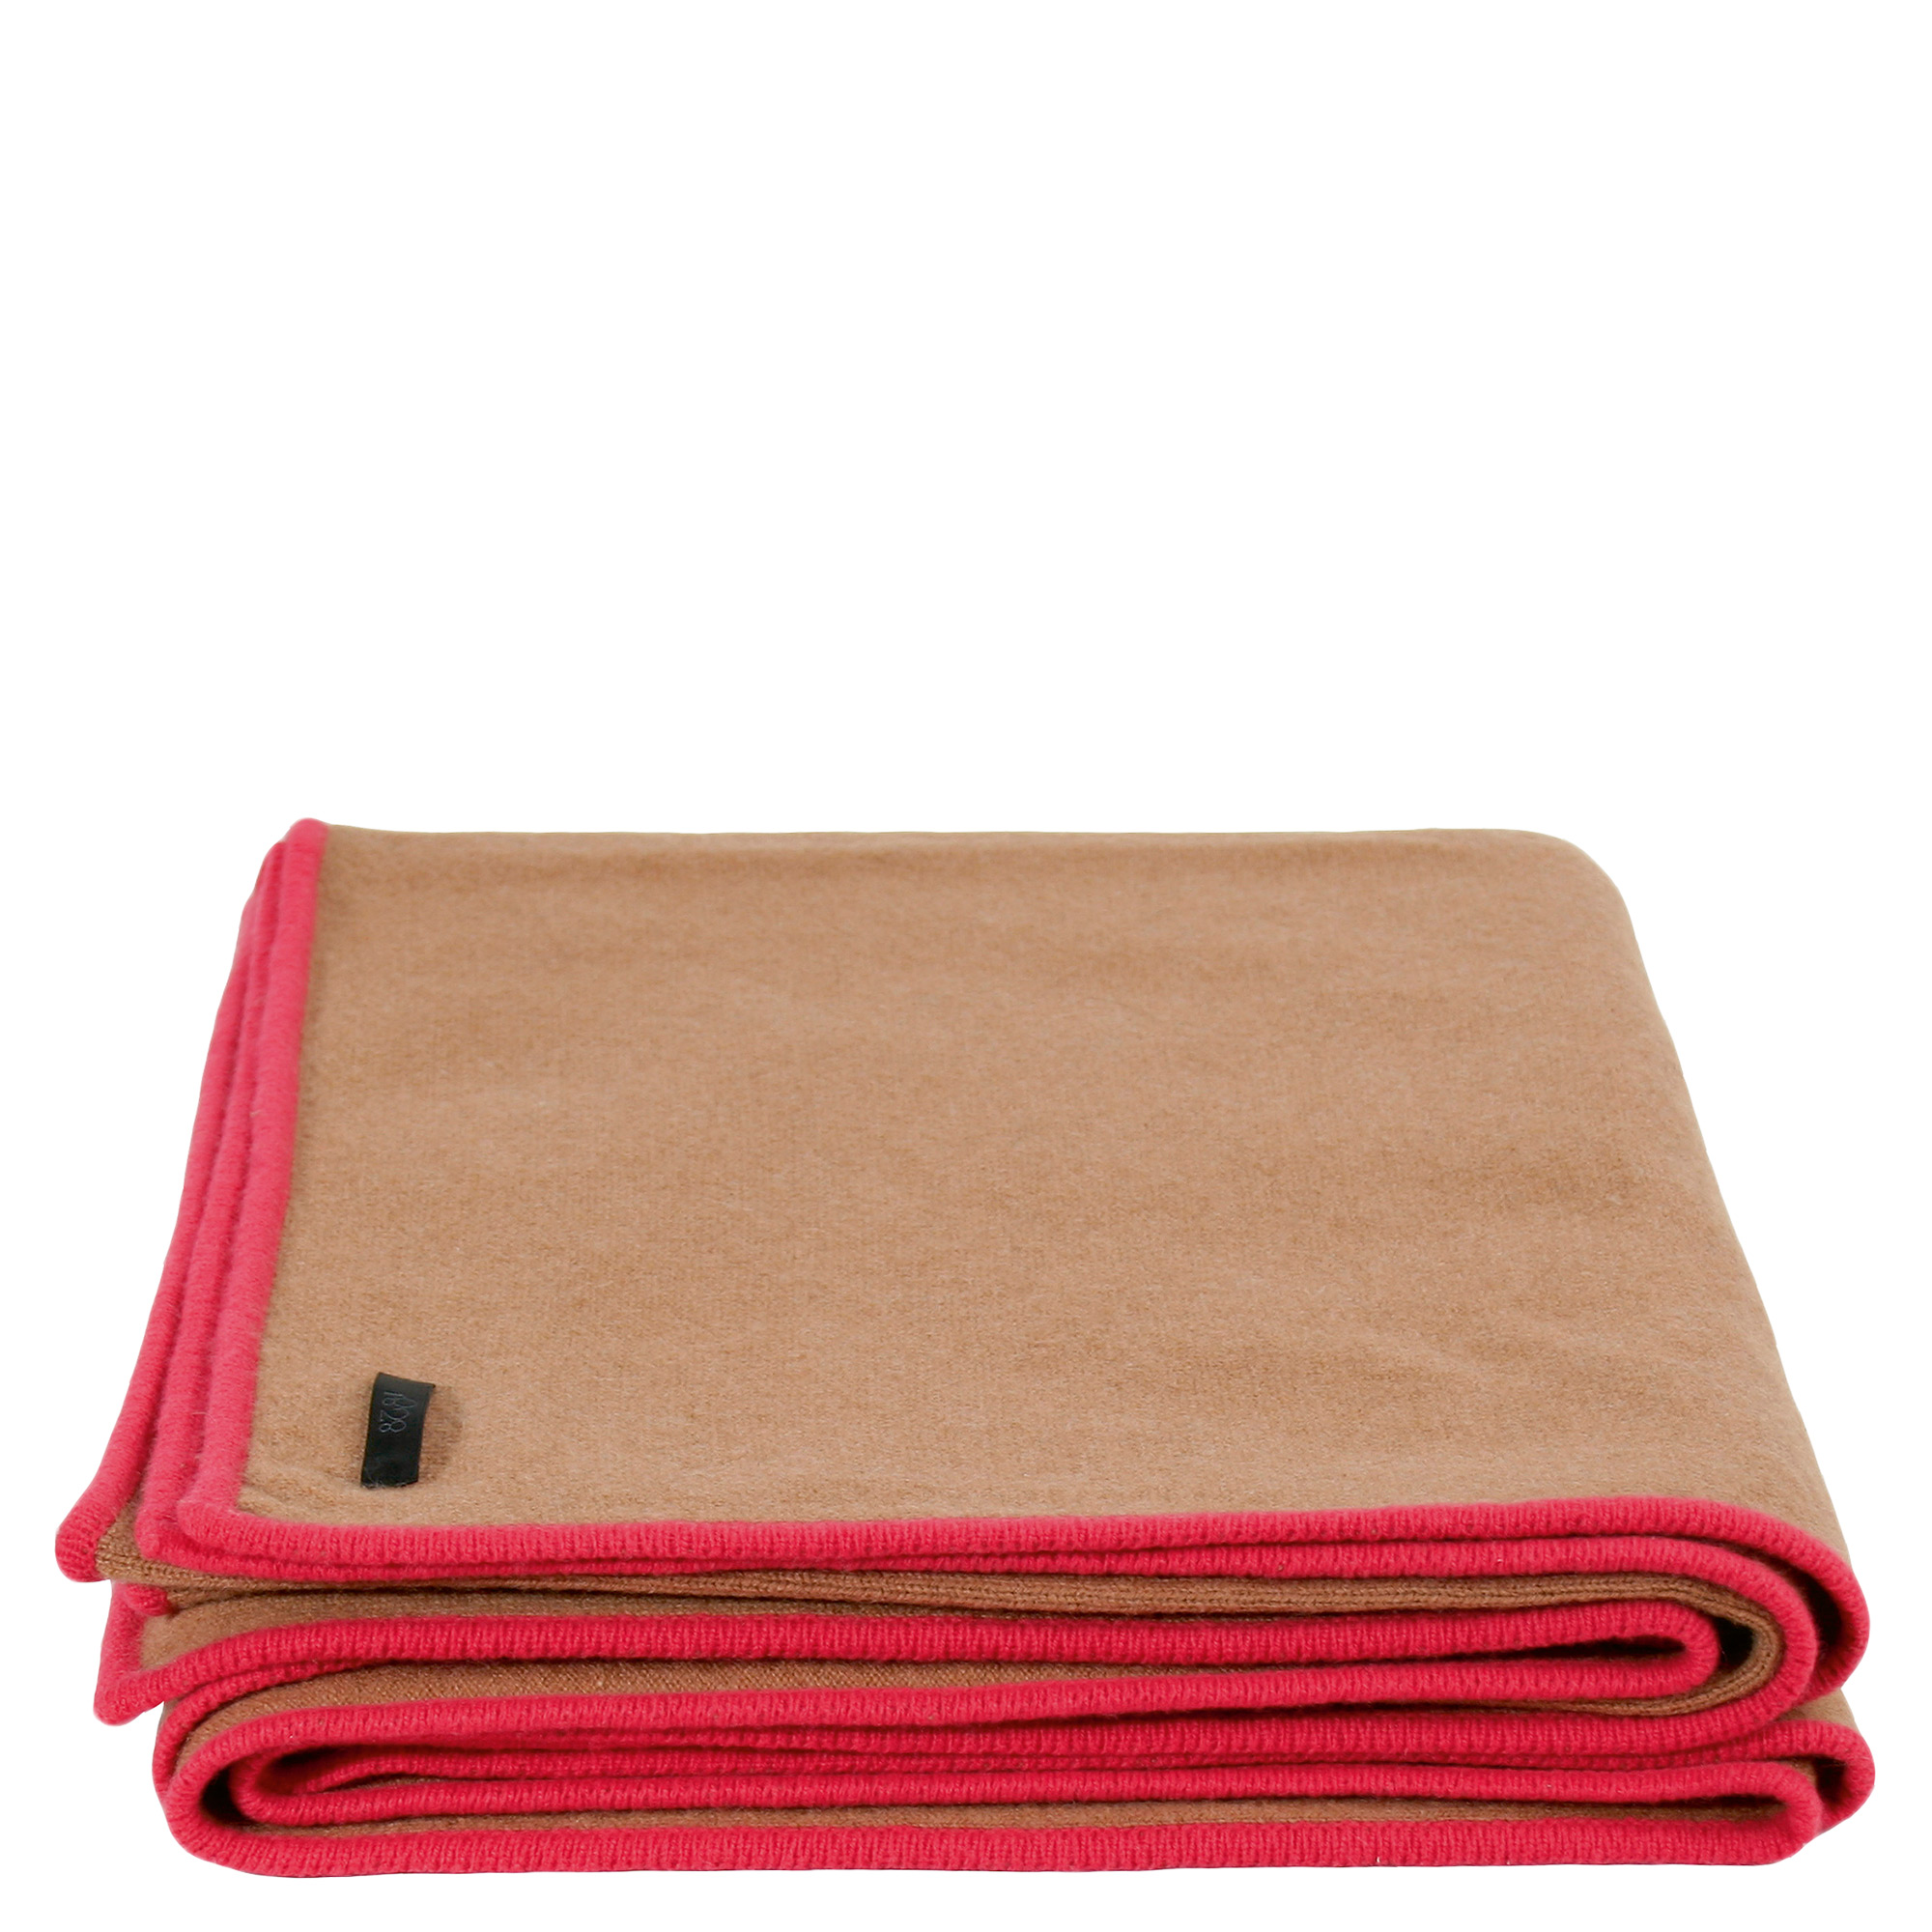 zoeppritz Edition 15/01 Decke, Farbe braun rot, Material Cashmere in Groesse 150x200